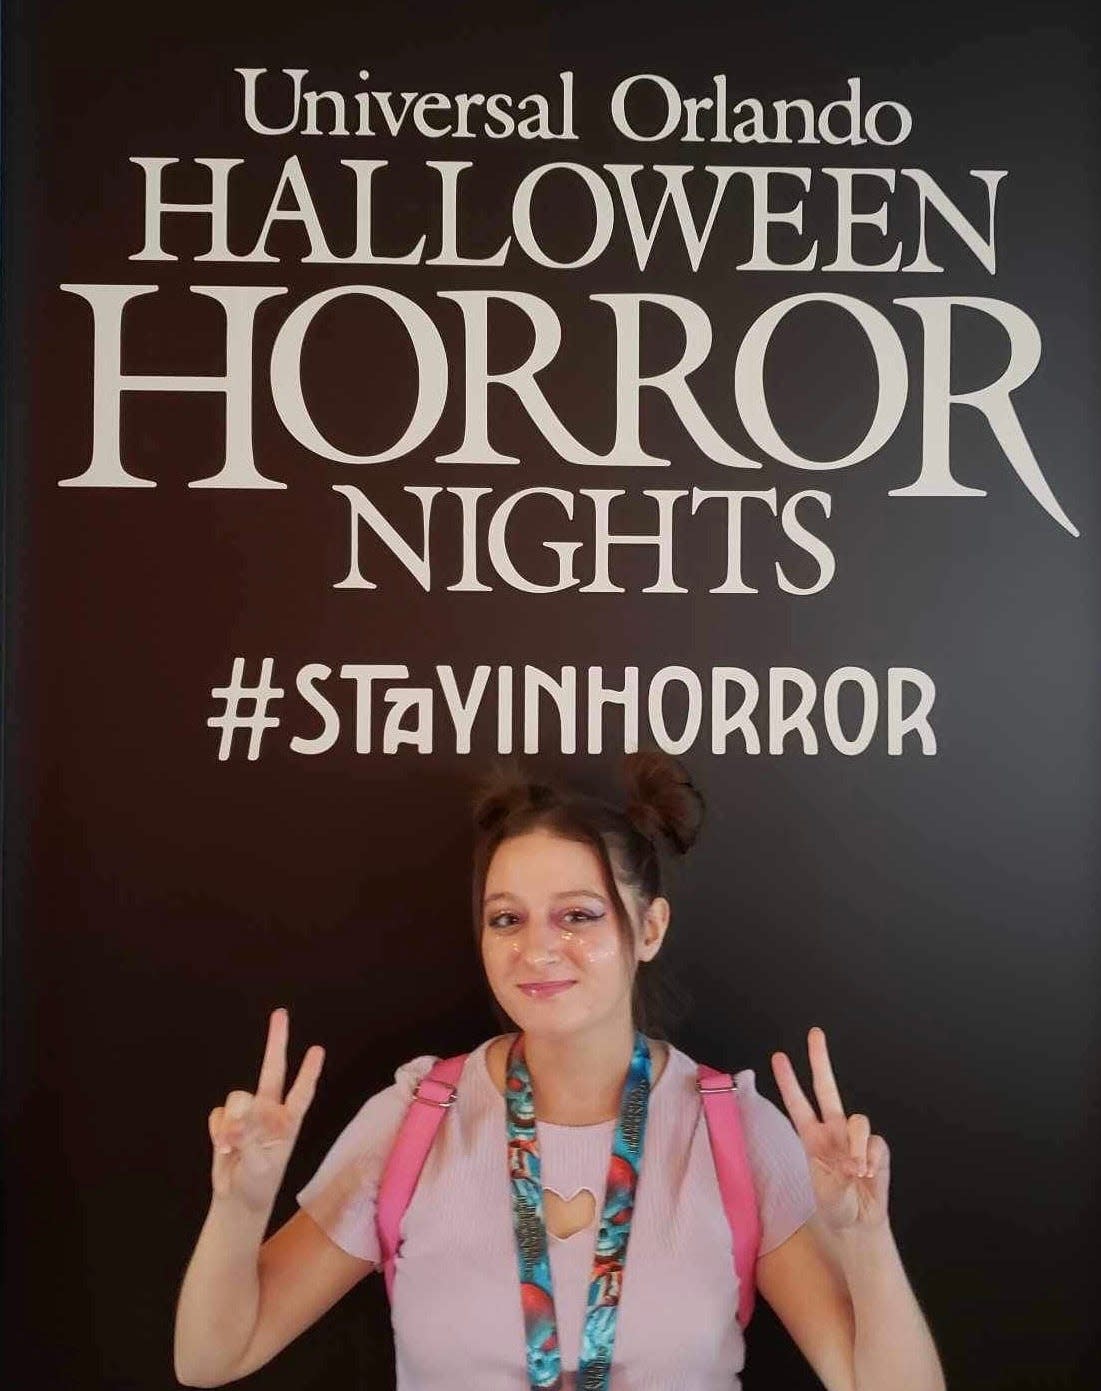 Leah Russo has a hard time traveling with Crohn's disease but says the one thing she wanted to experience this year was Halloween Horror Nights at Universal Orlando Resort.